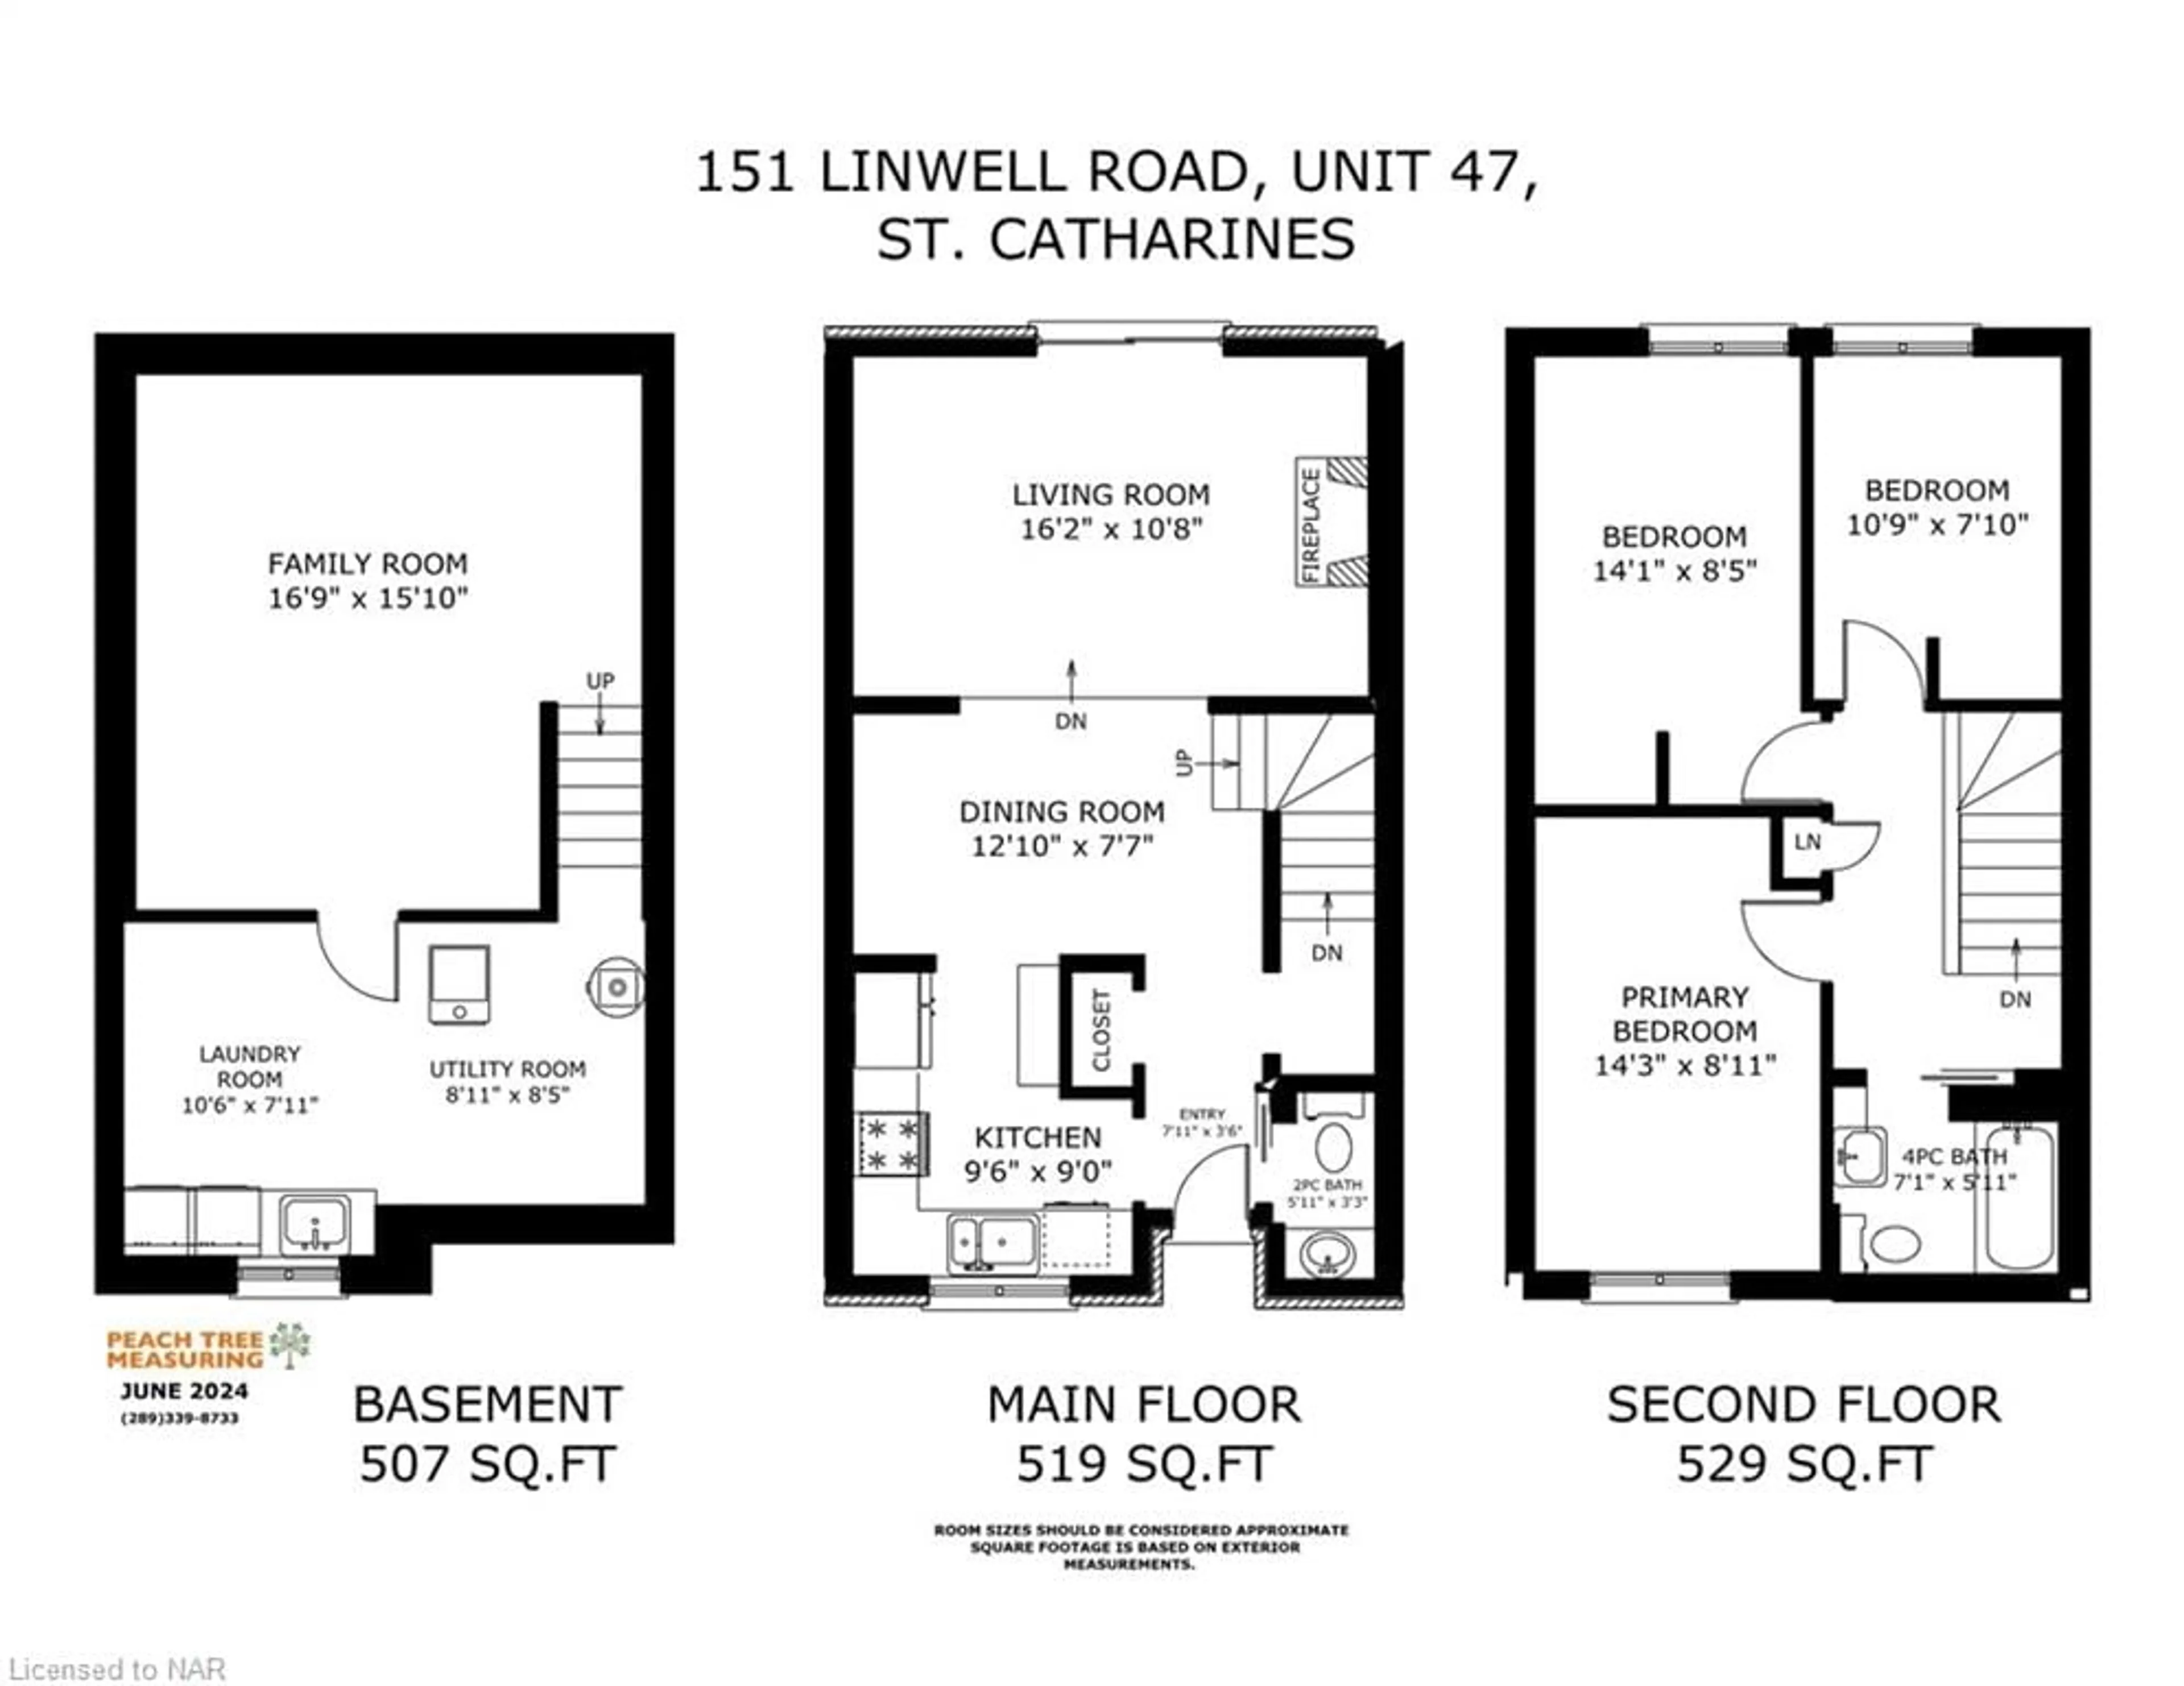 Floor plan for 151 Linwell Rd #47, St. Catharines Ontario L2N 6P3